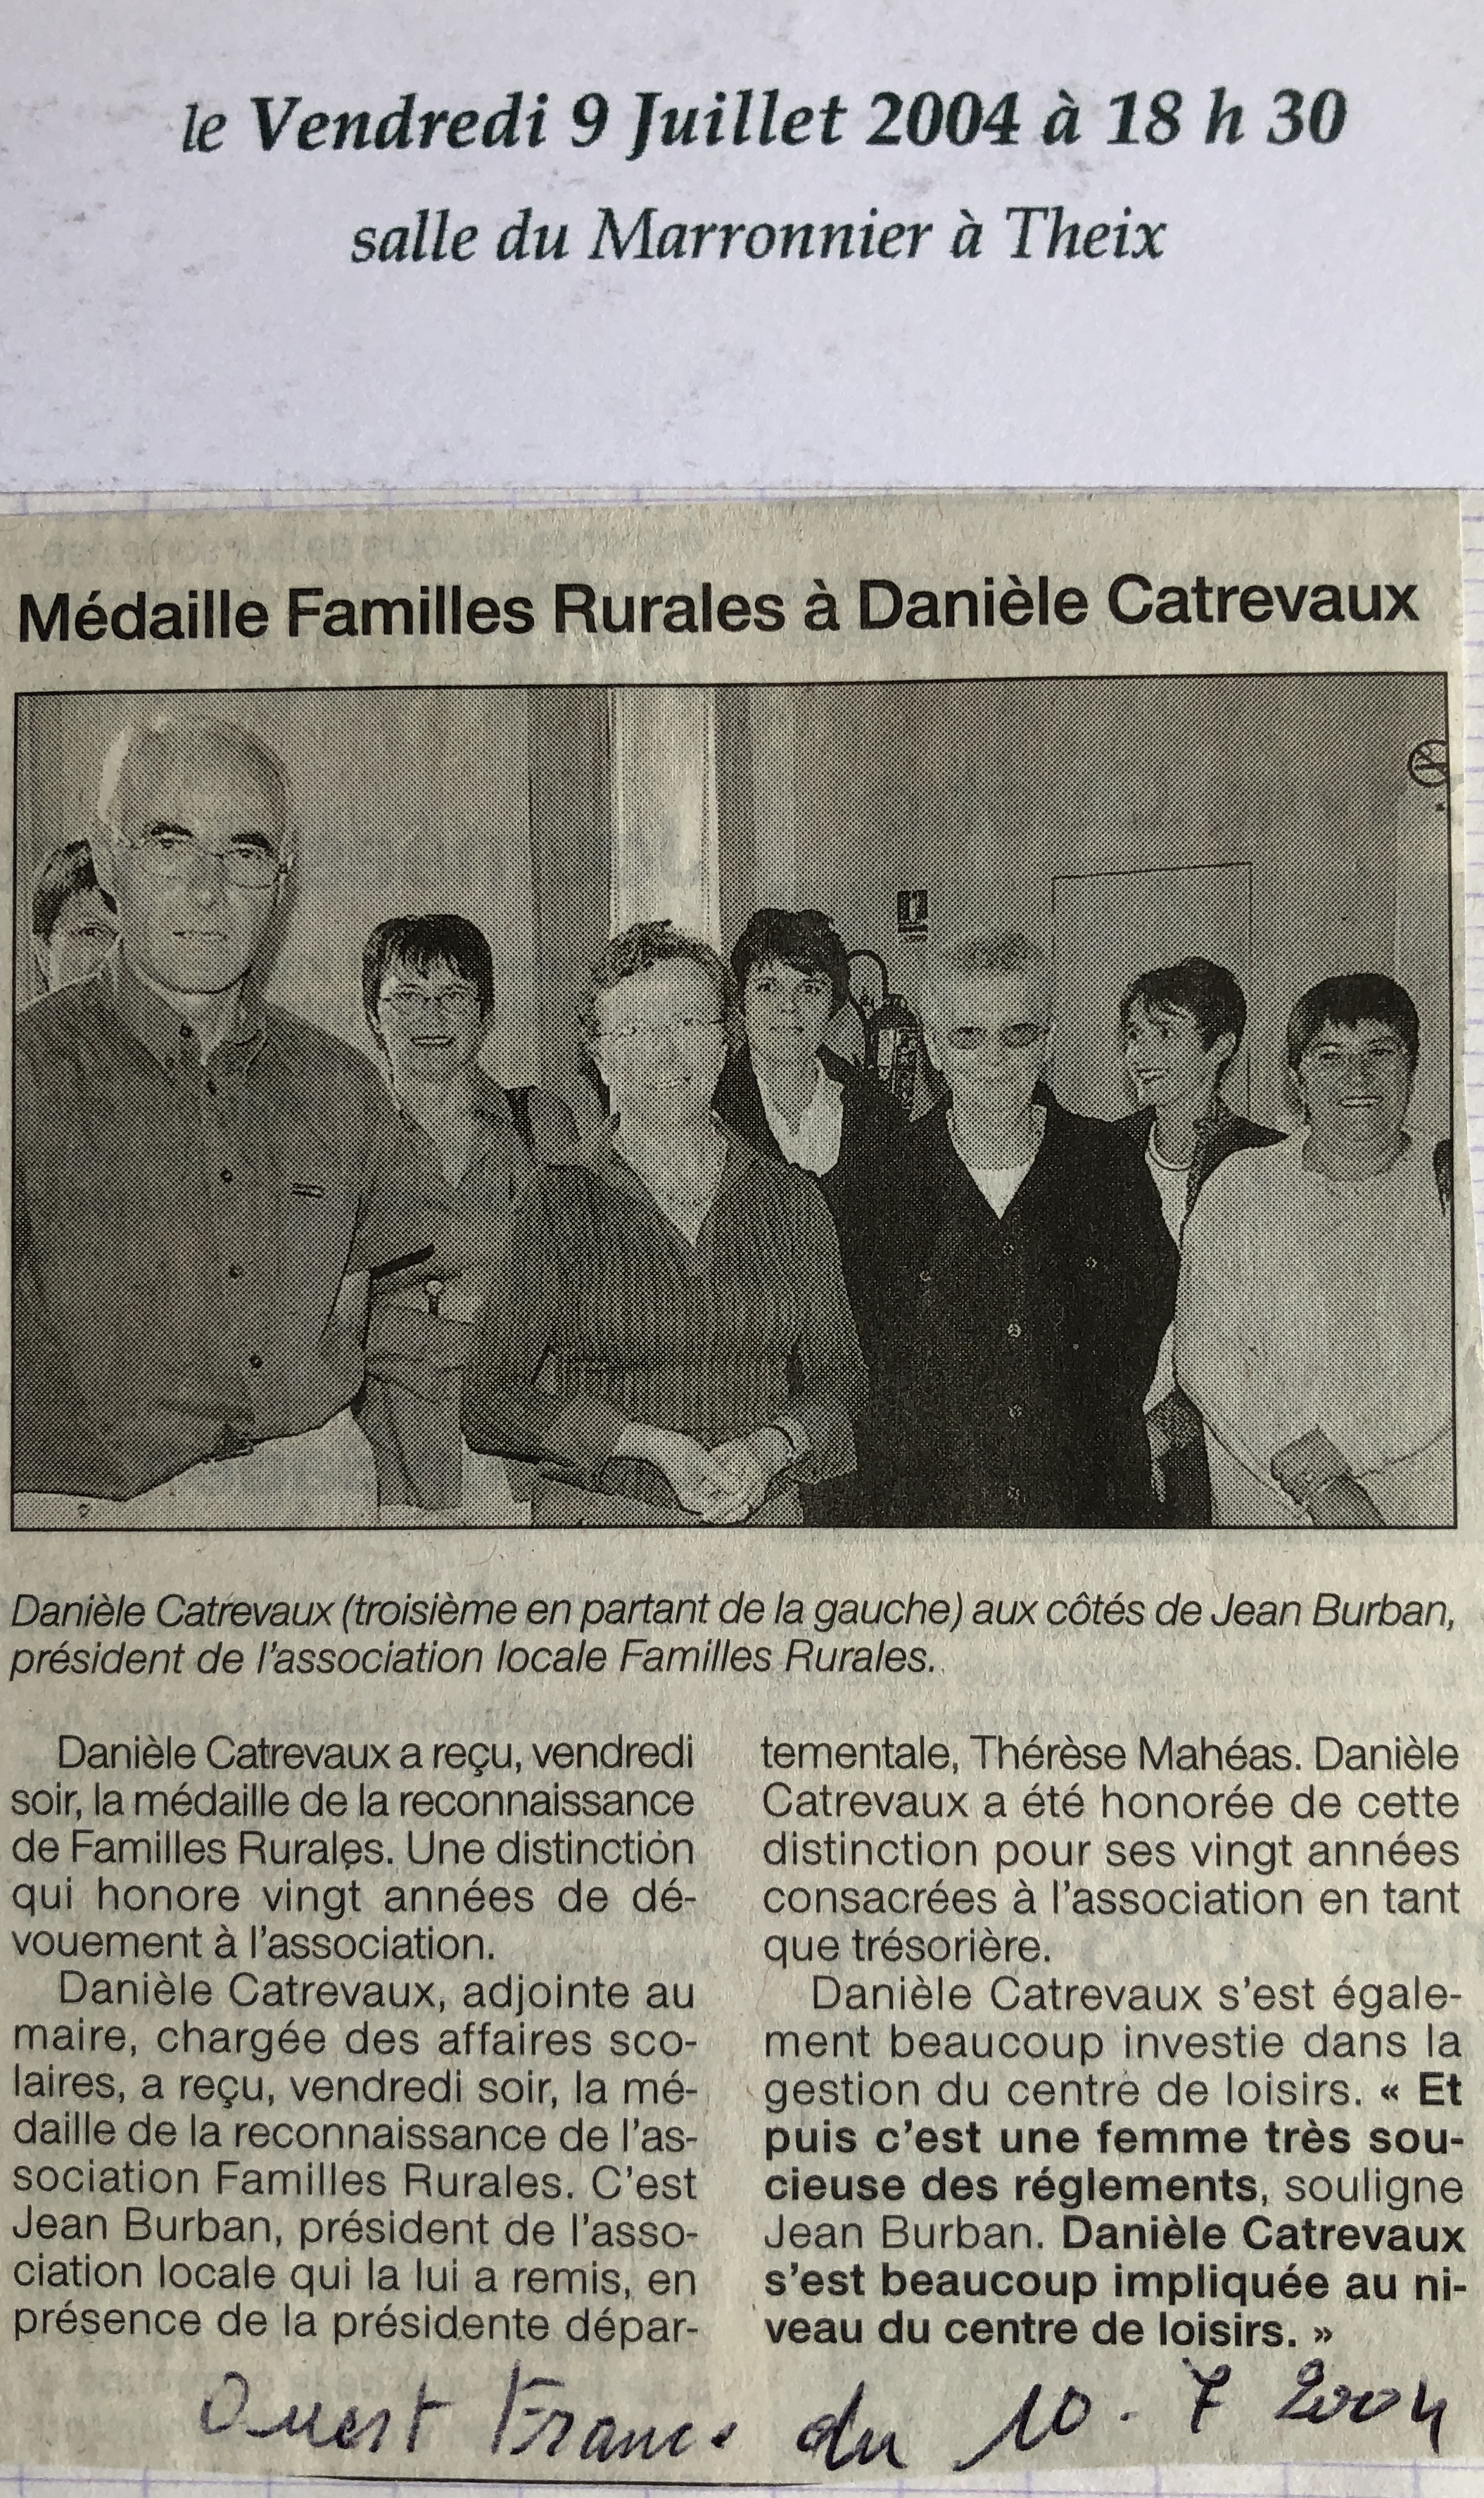 2004-07-09%20m%C3%A9daille%20Catrevaux.jpg